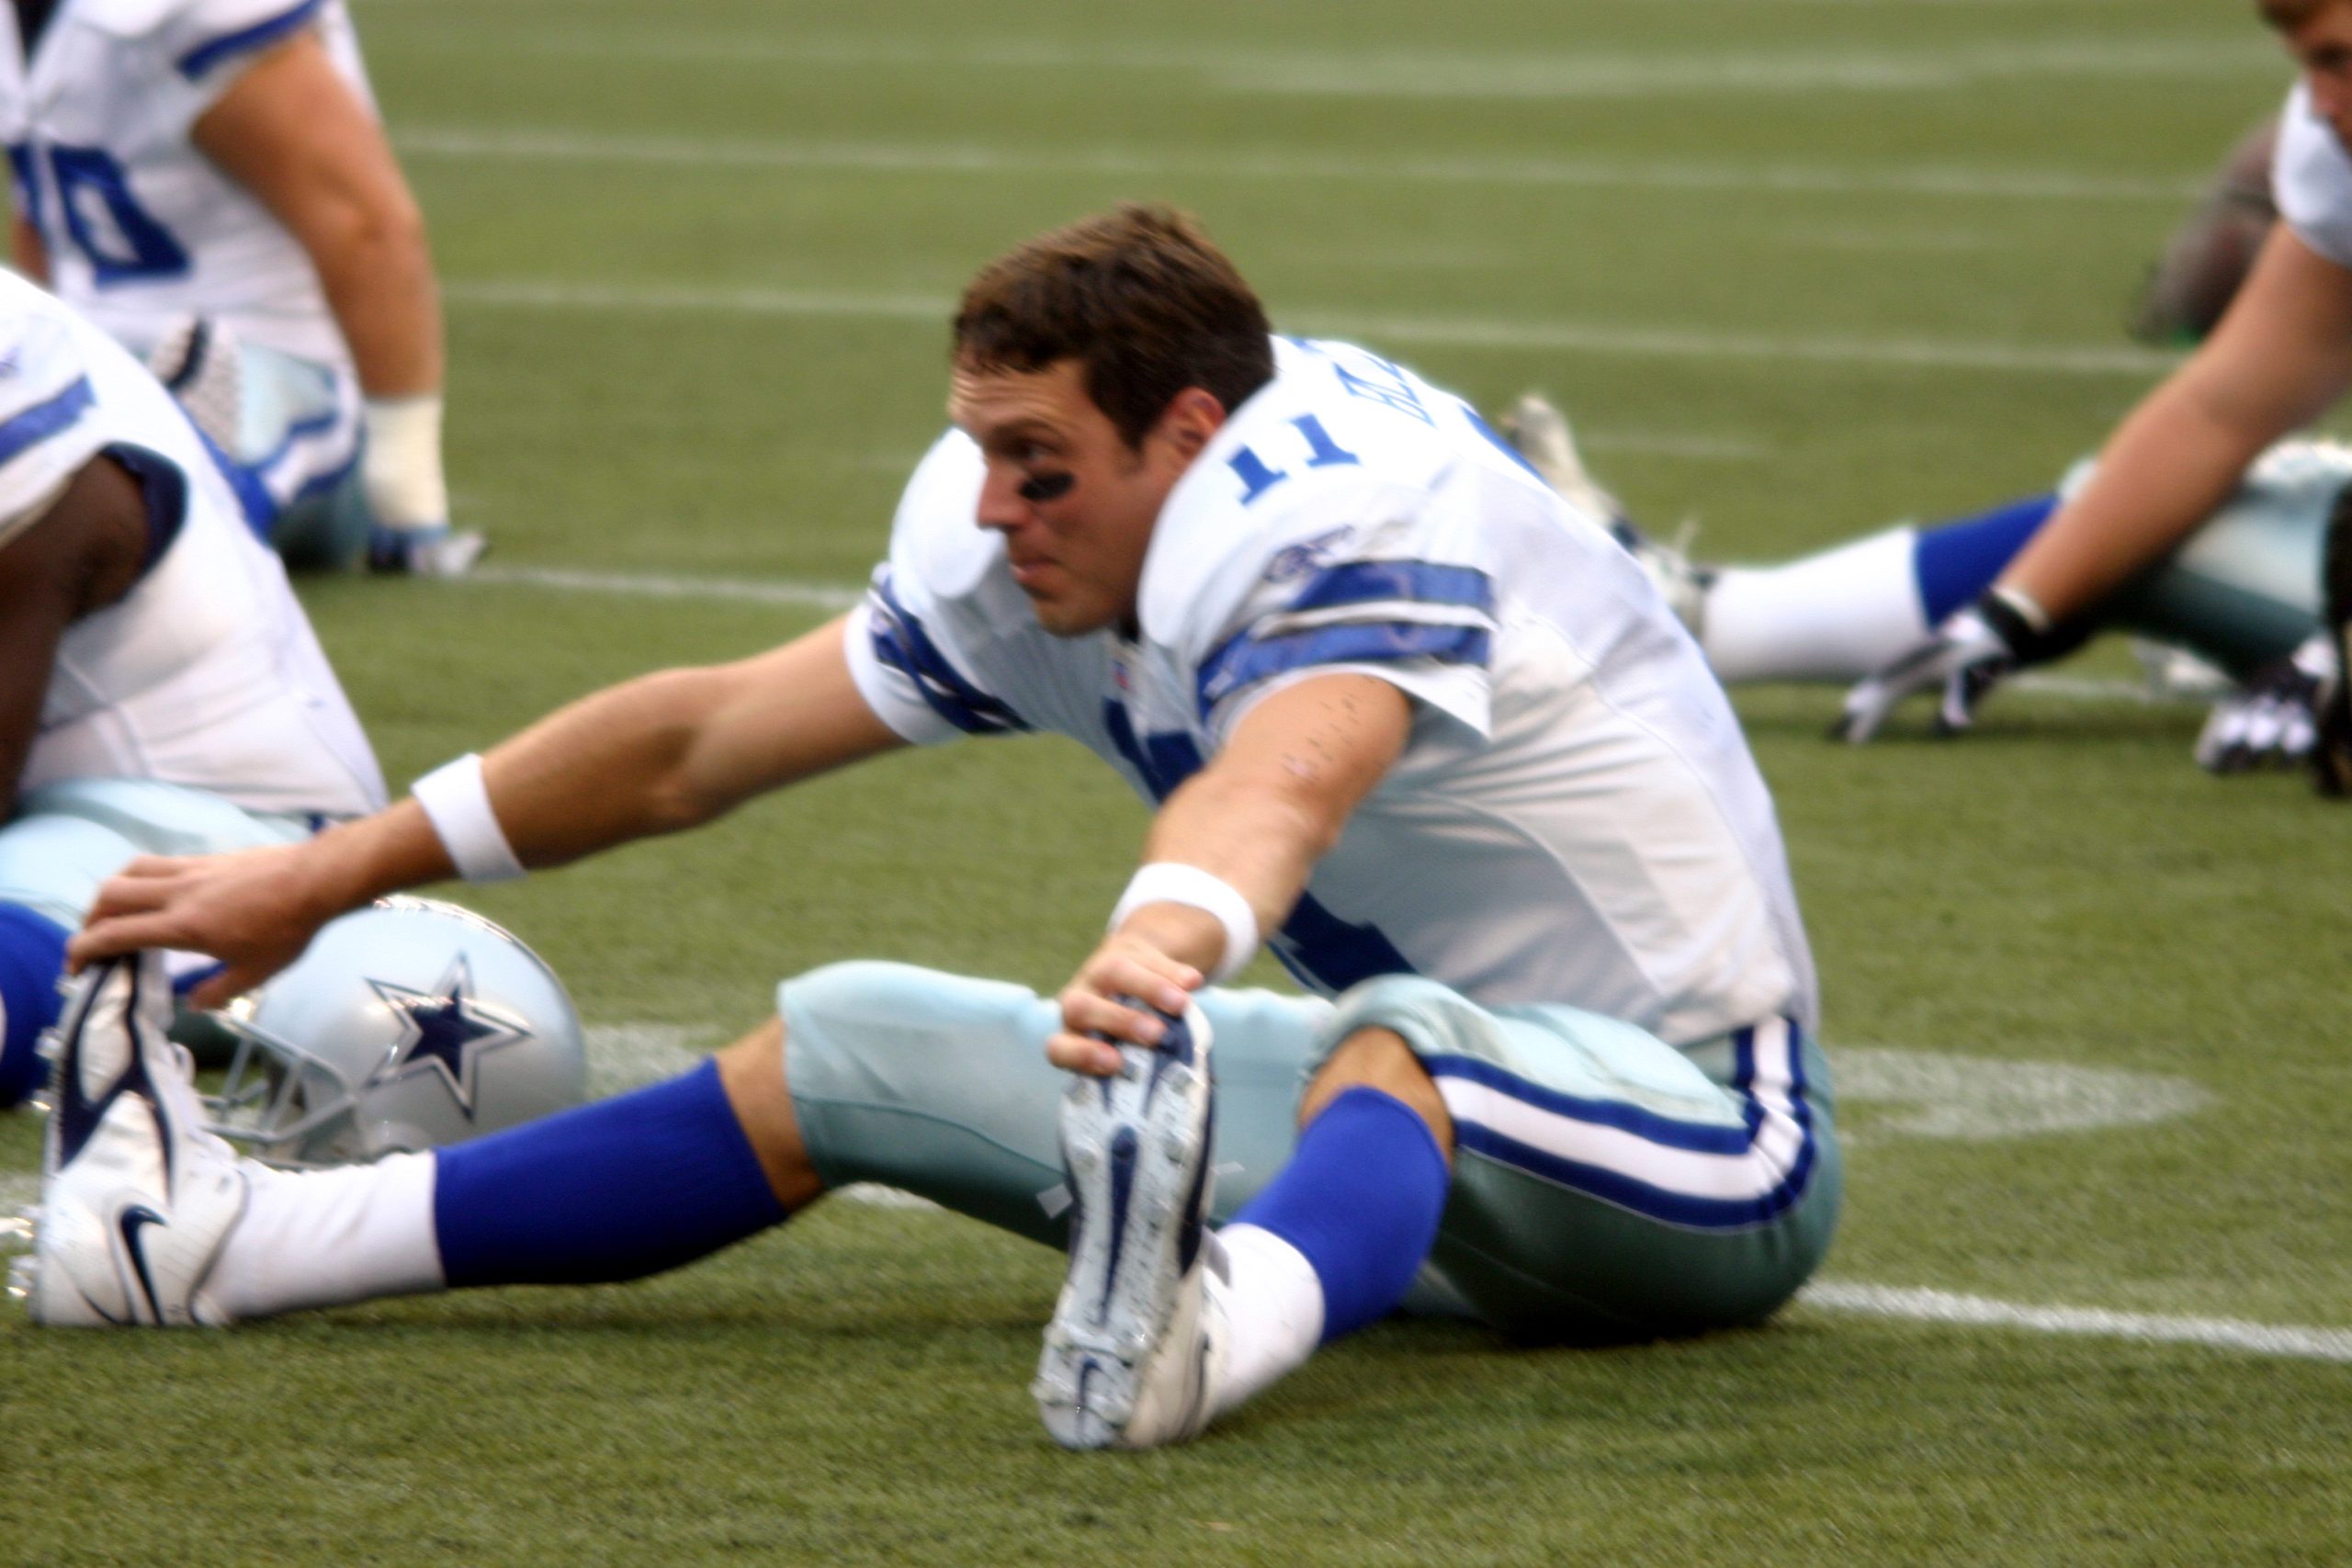 football player stretching